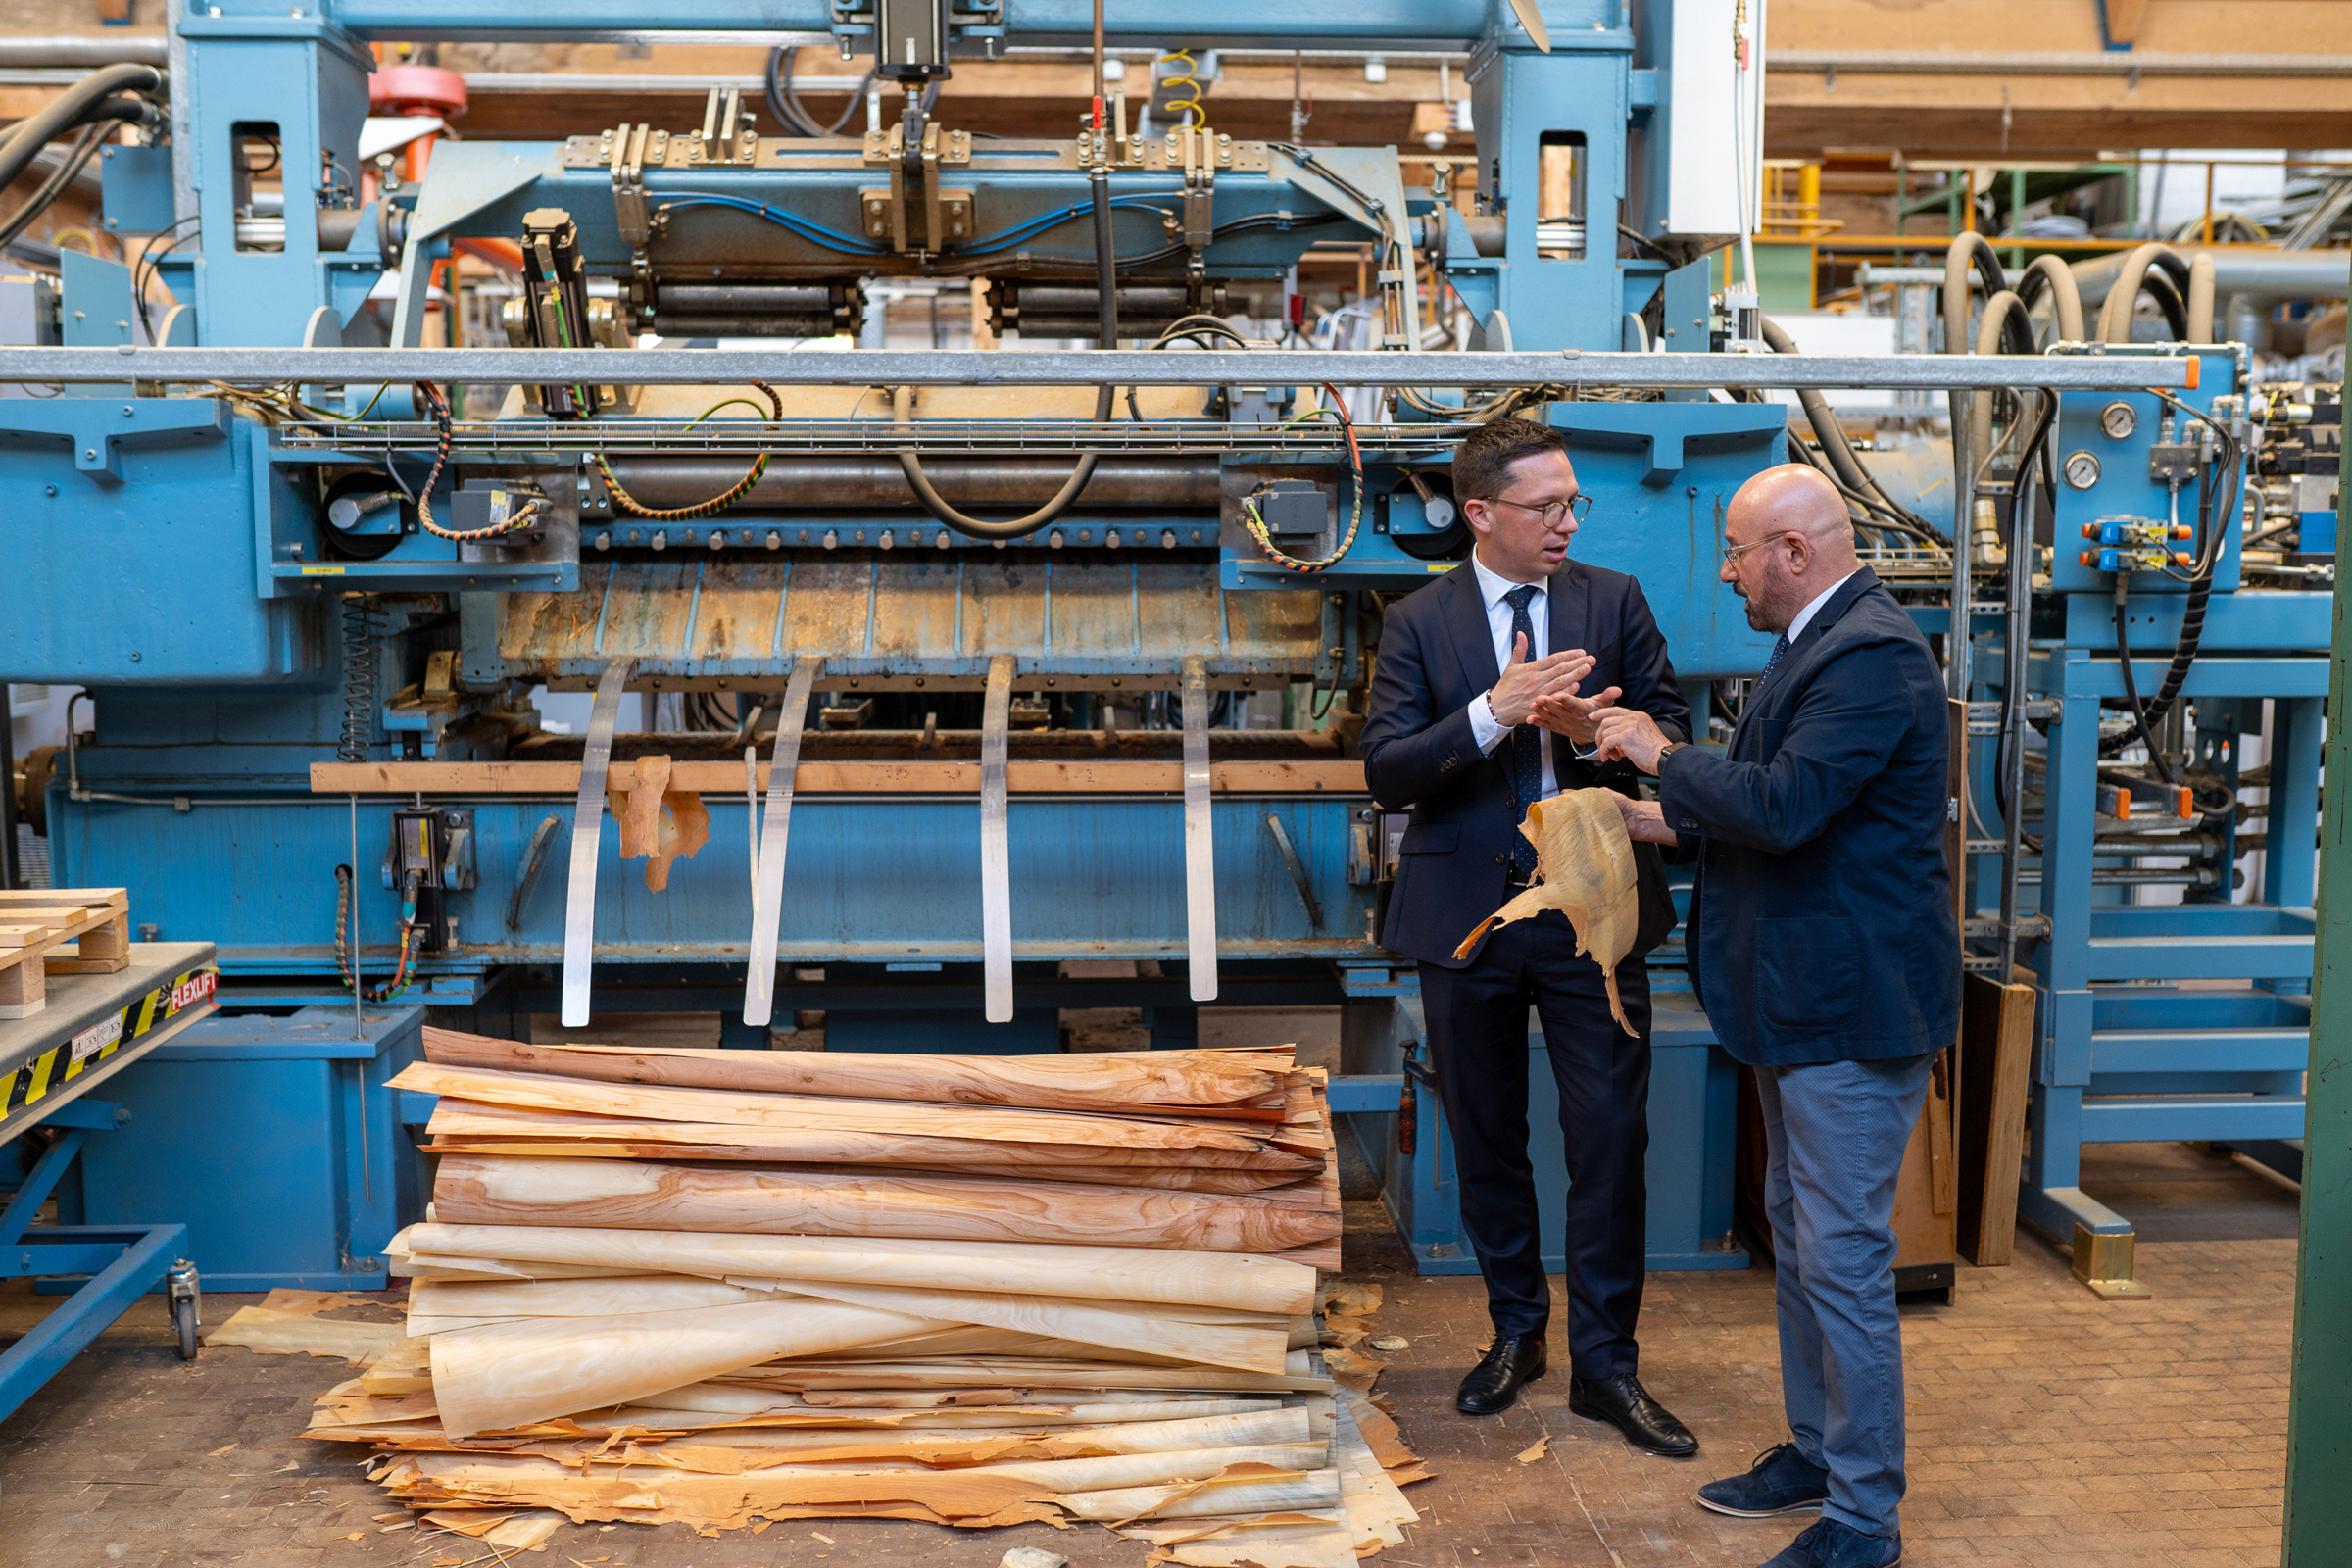 The photo shows Minister Falko Mohrs and Institute Director Professor Kasal in front of a large technical plant on which wood veneer is being produced.